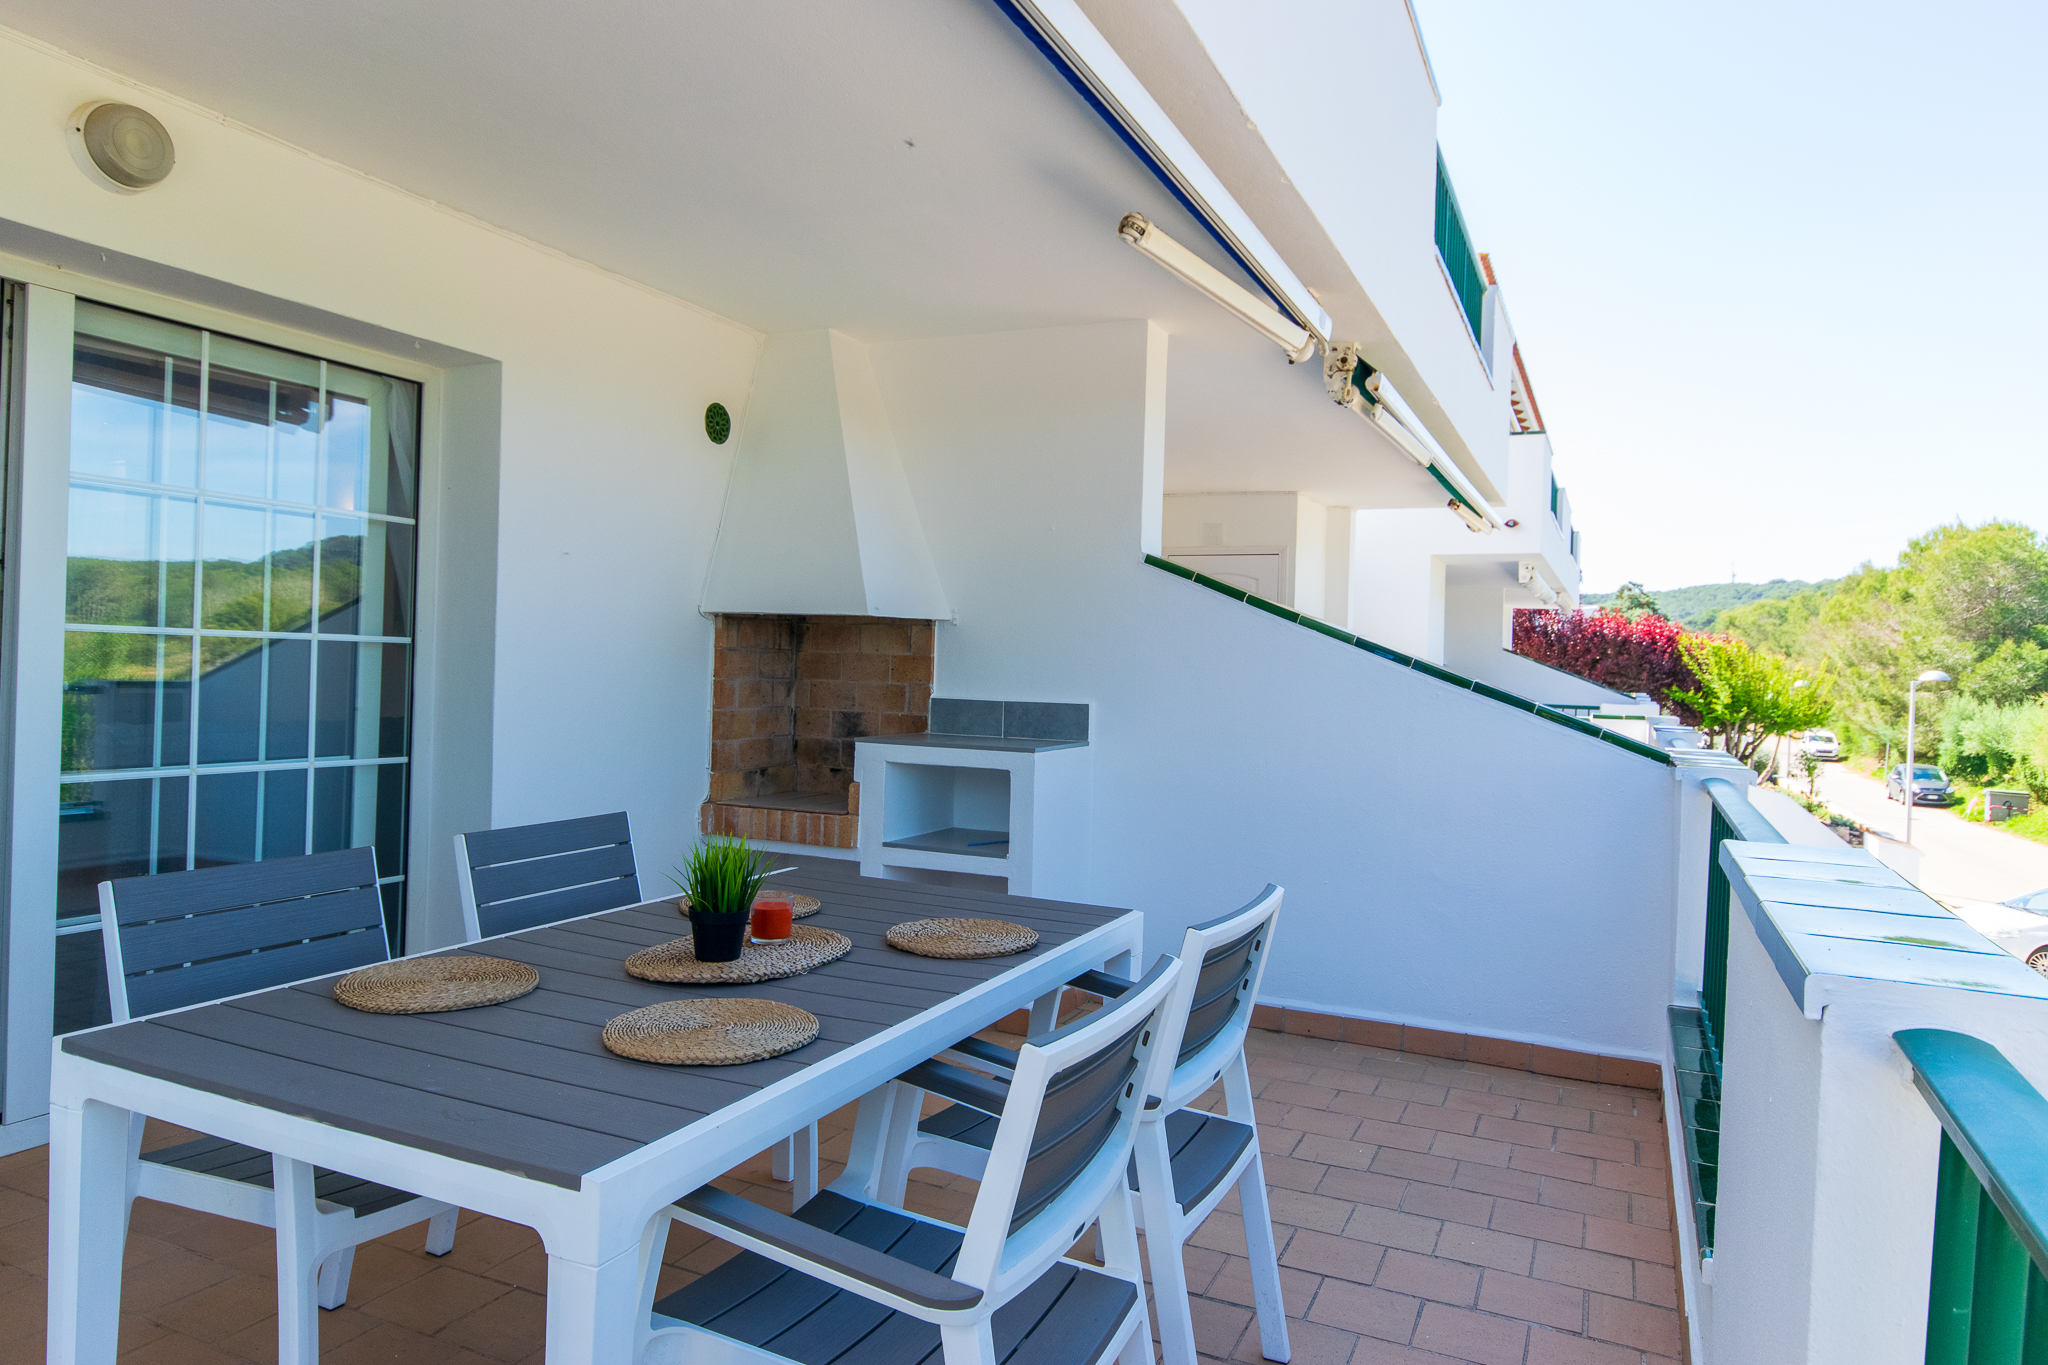 Apartment terrace with pool for sale in Son Parc